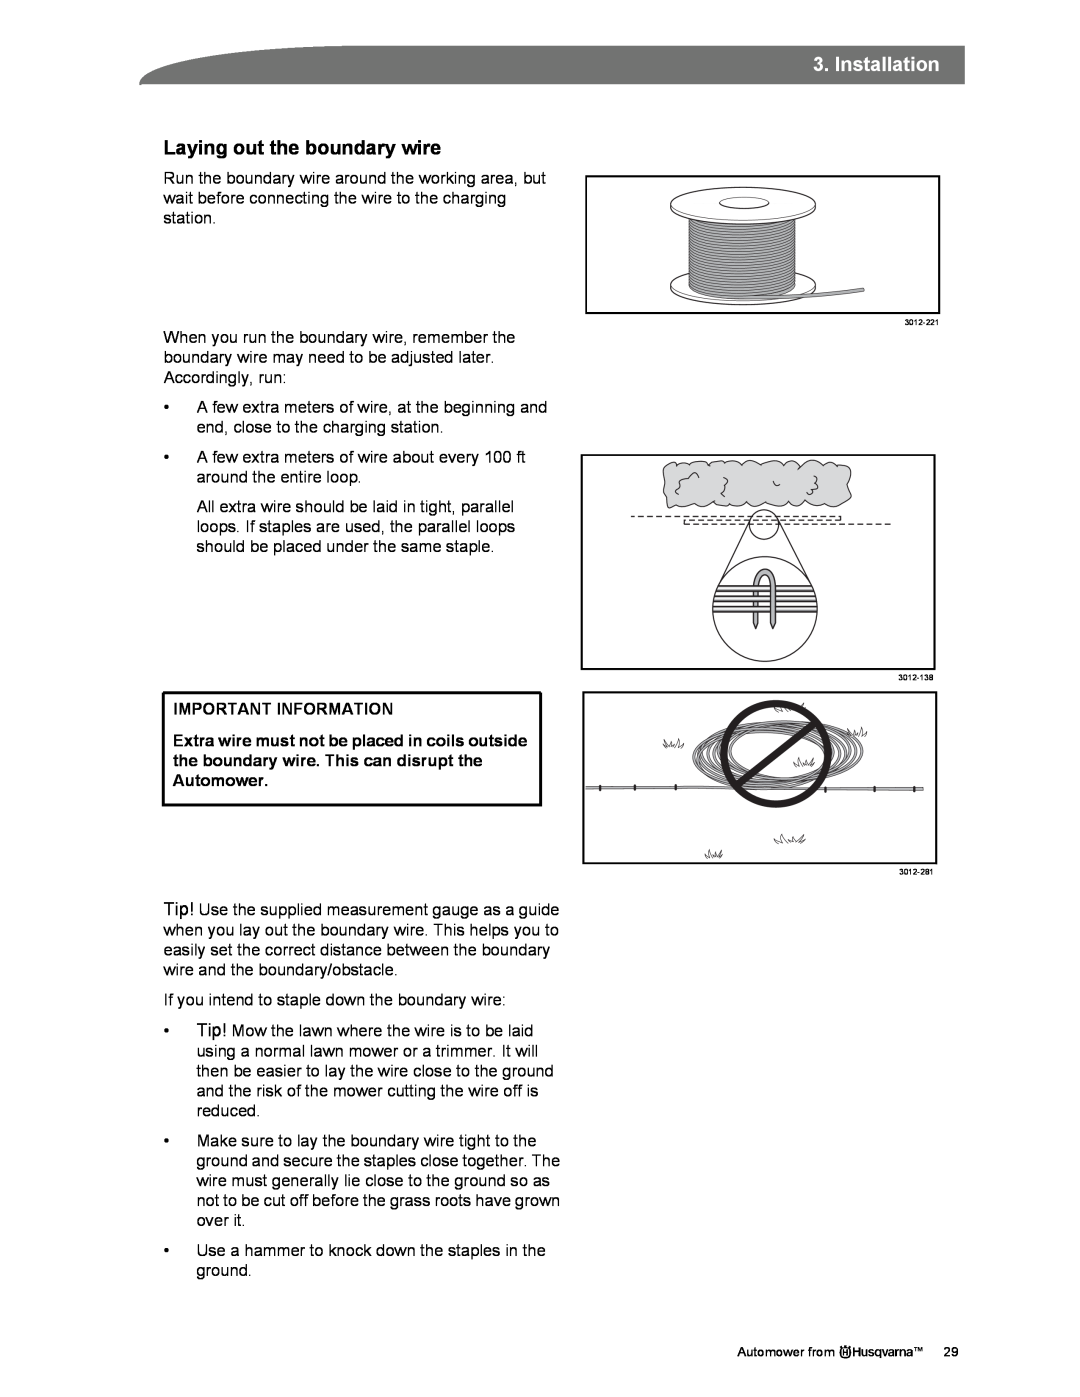 Husqvarna Automower manual Laying out the boundary wire, Installation, Important Information 